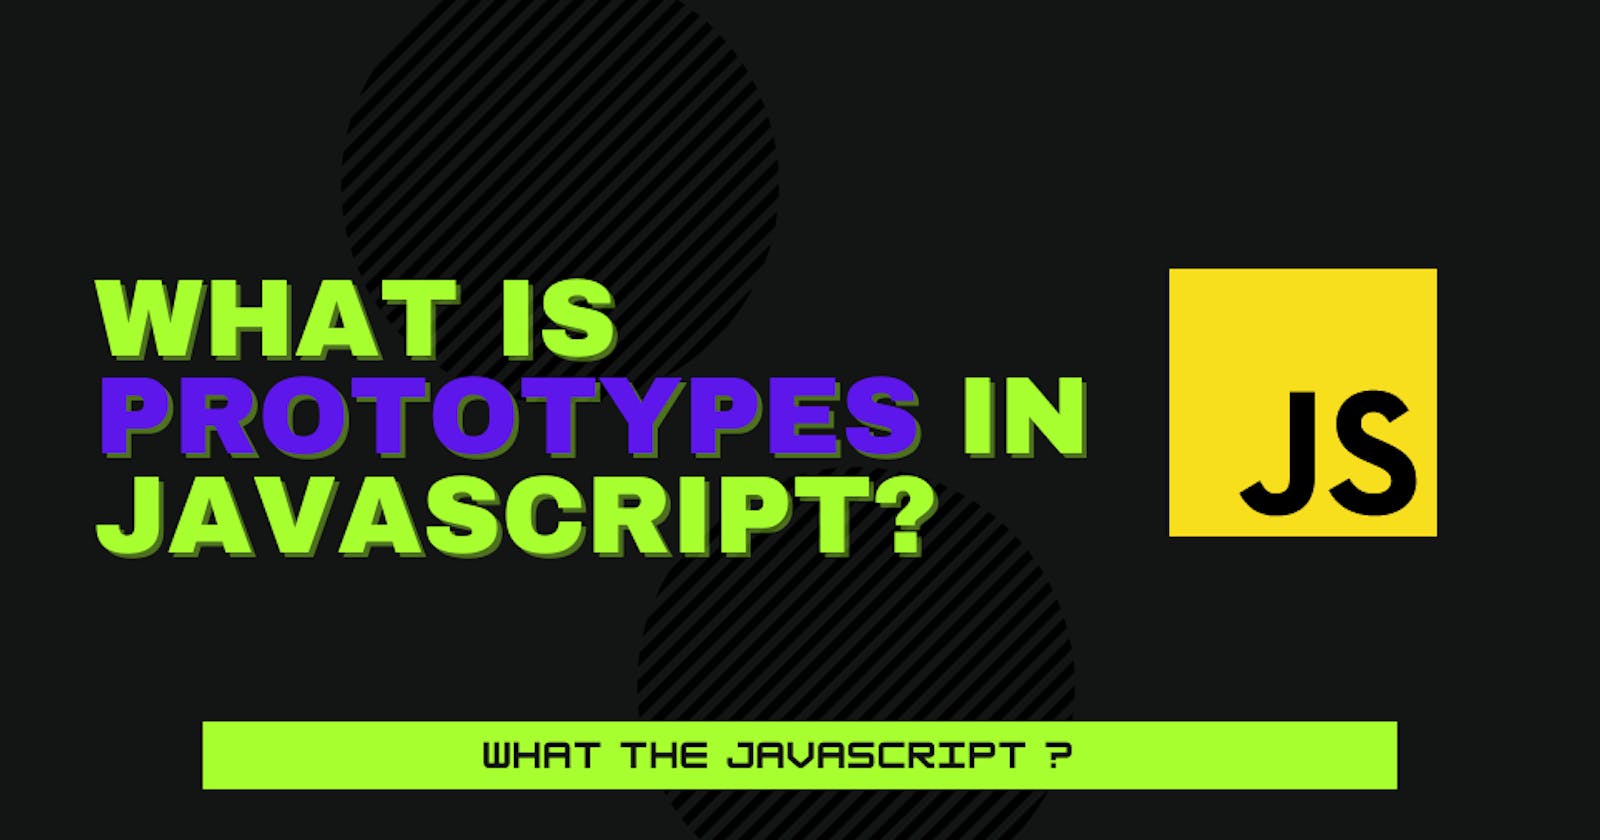 What are Prototypes in JavaScript?